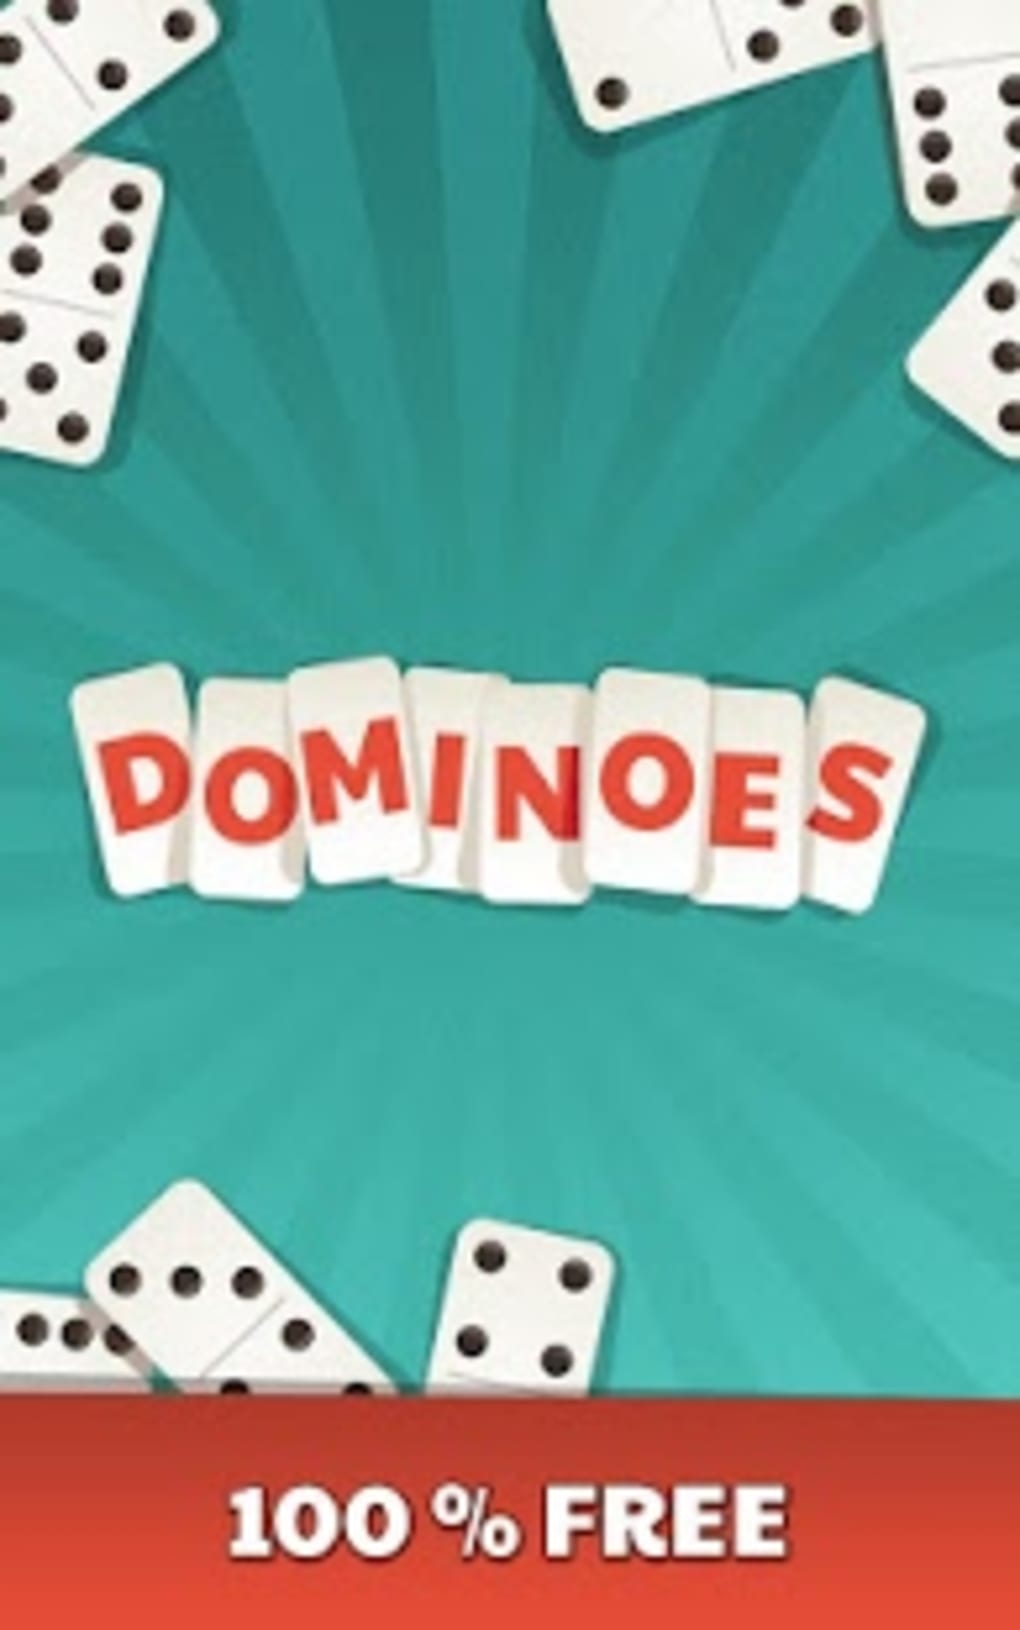 Dominos Online Jogatina: Game Game for Android - Download